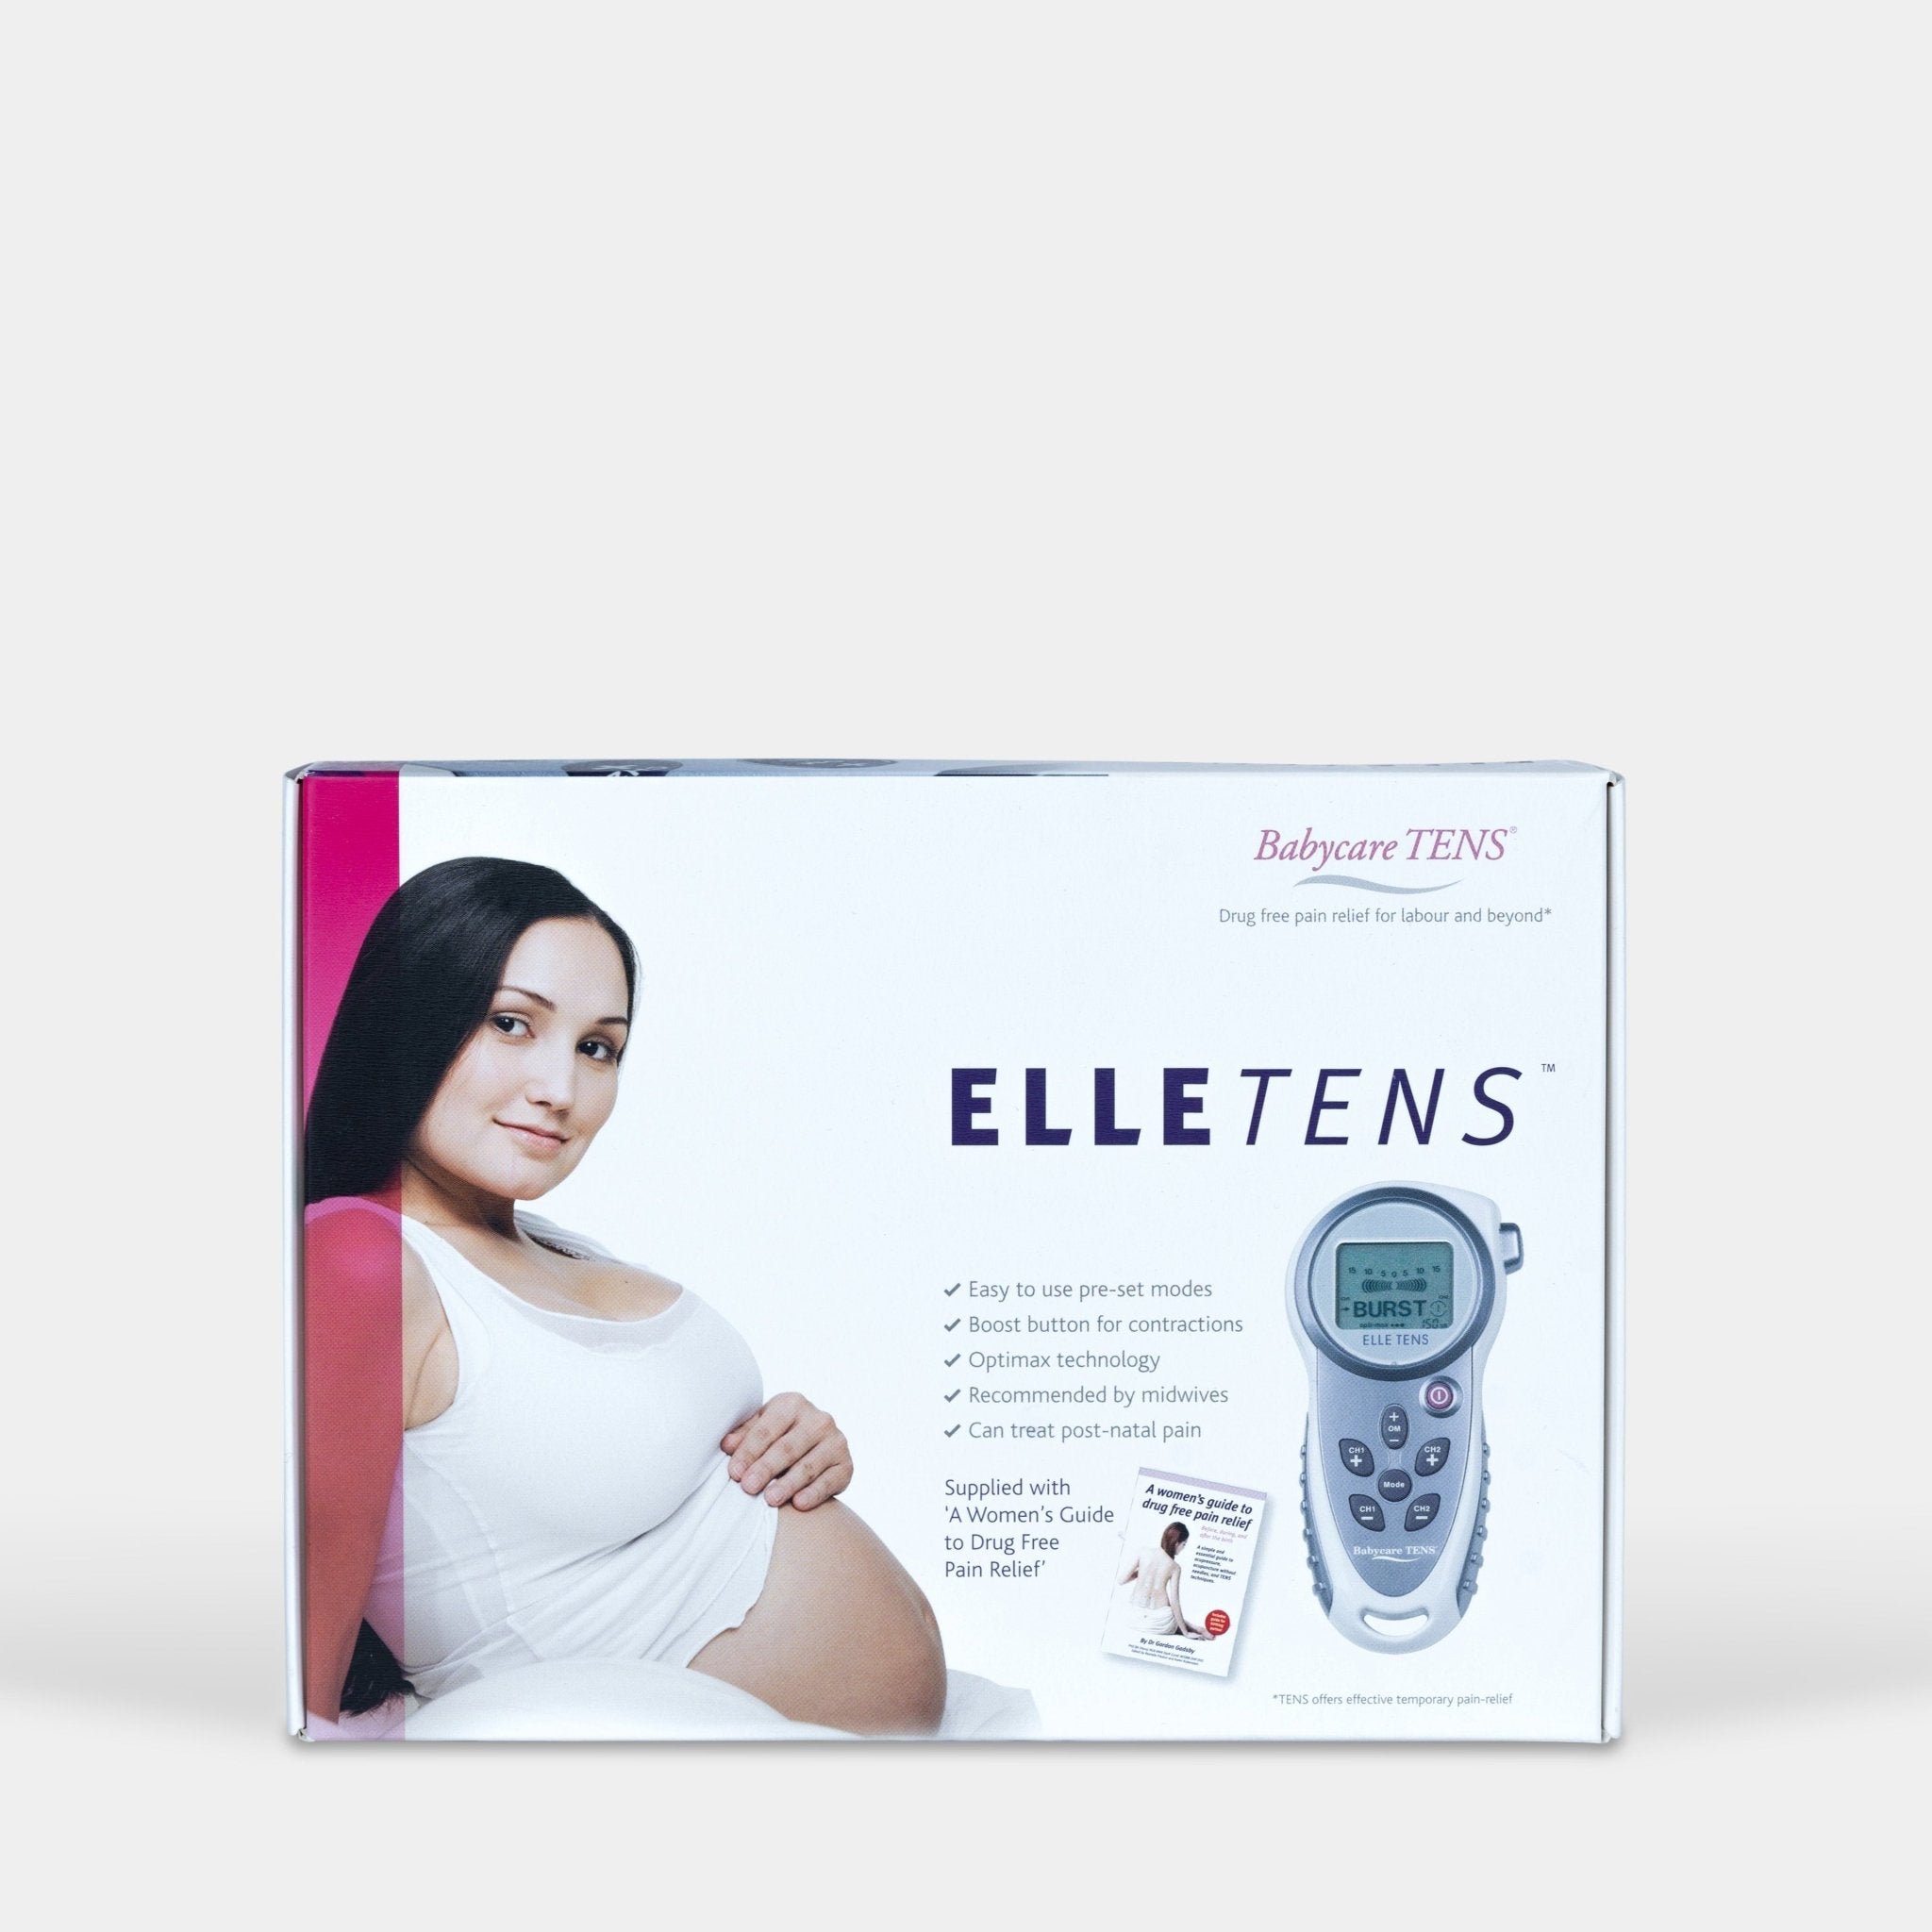 Elle TENS - The Birth Store-Babycare TENS